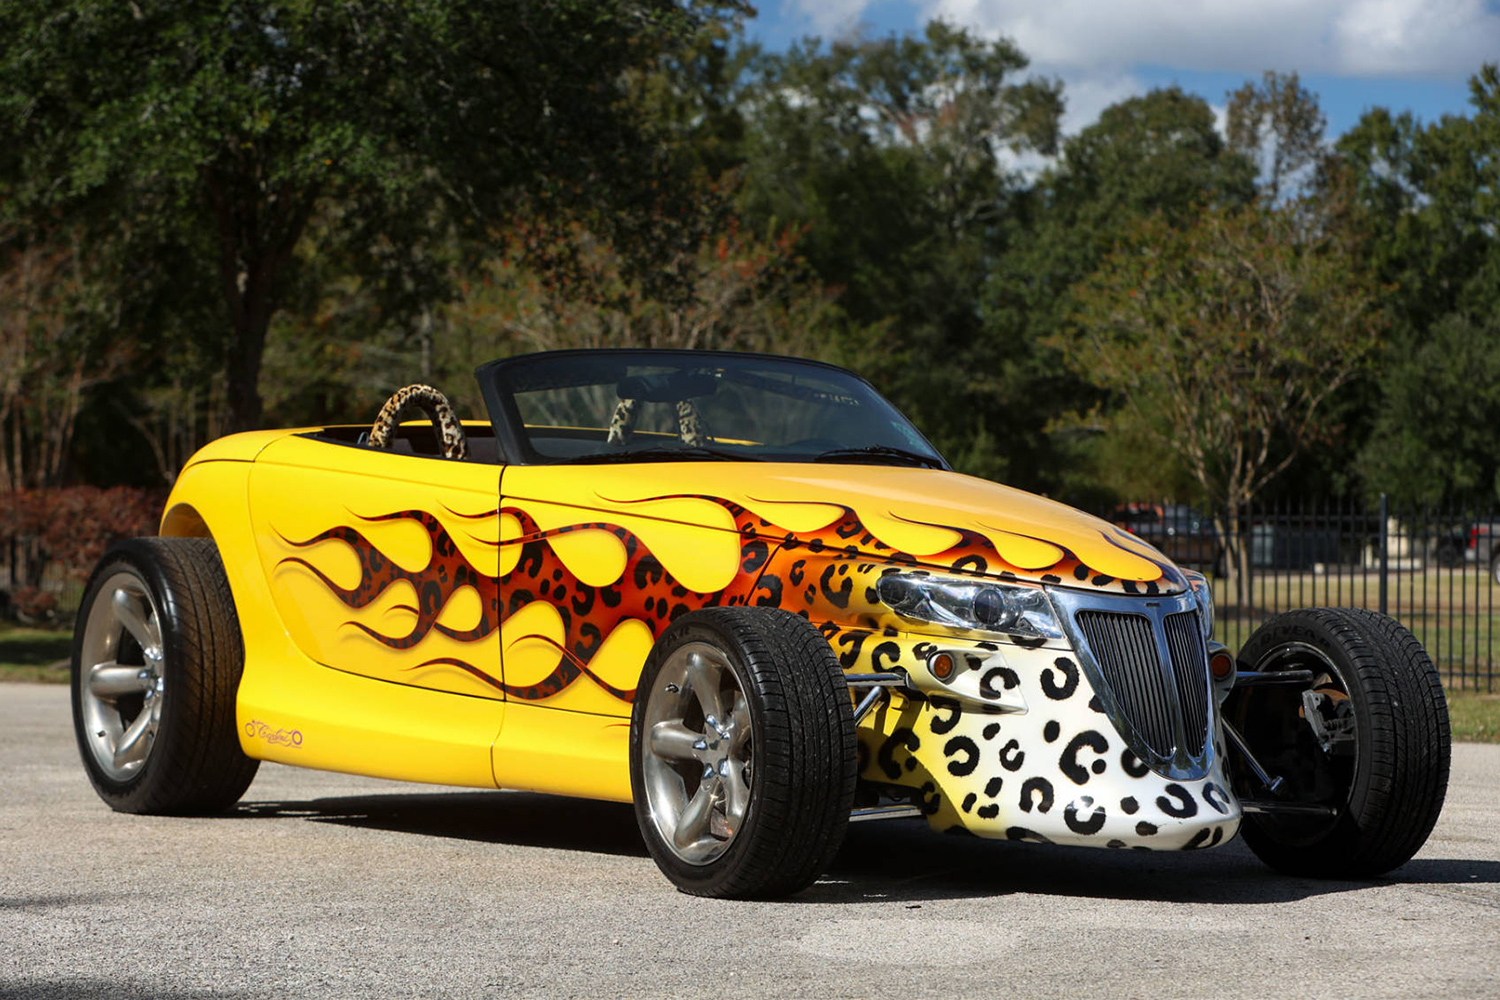 1999 Plymouth Prowler reportedly once owned by Dennis Rodman, now up for auction as part of the George Foreman Collection